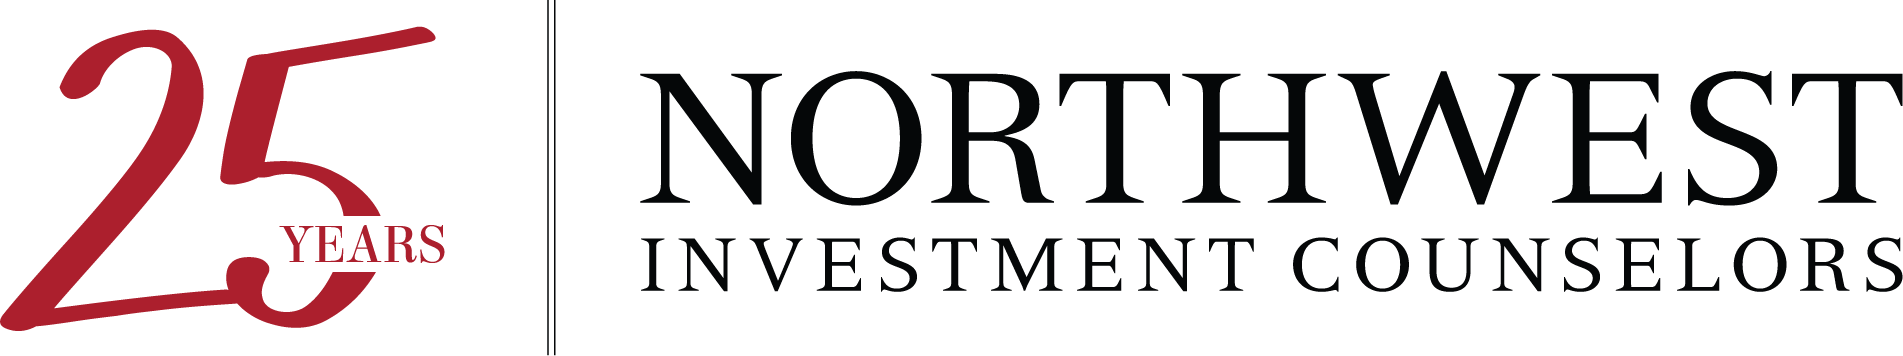 Northwest Investment Counselors